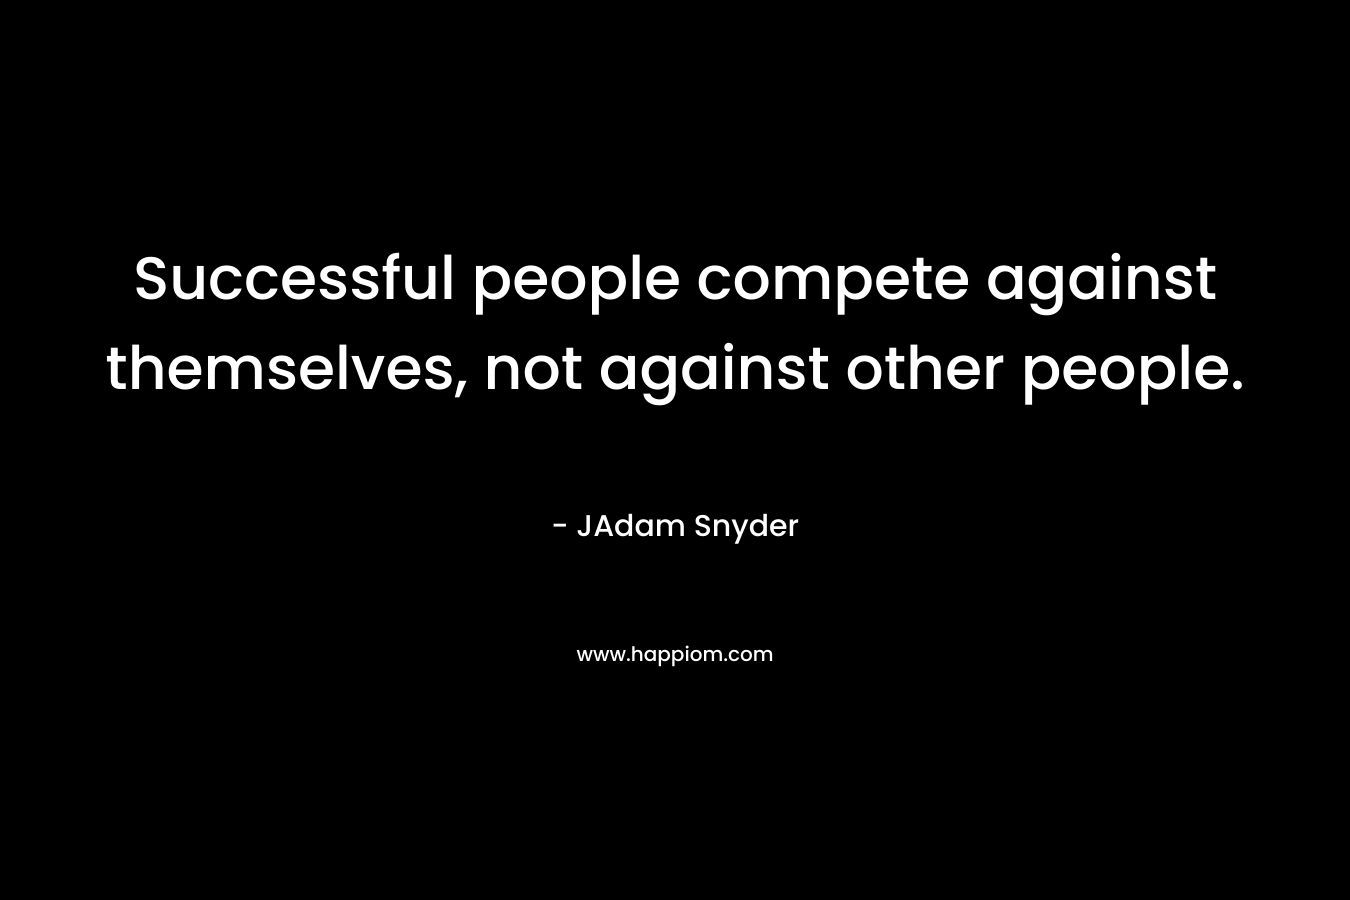 Successful people compete against themselves, not against other people.